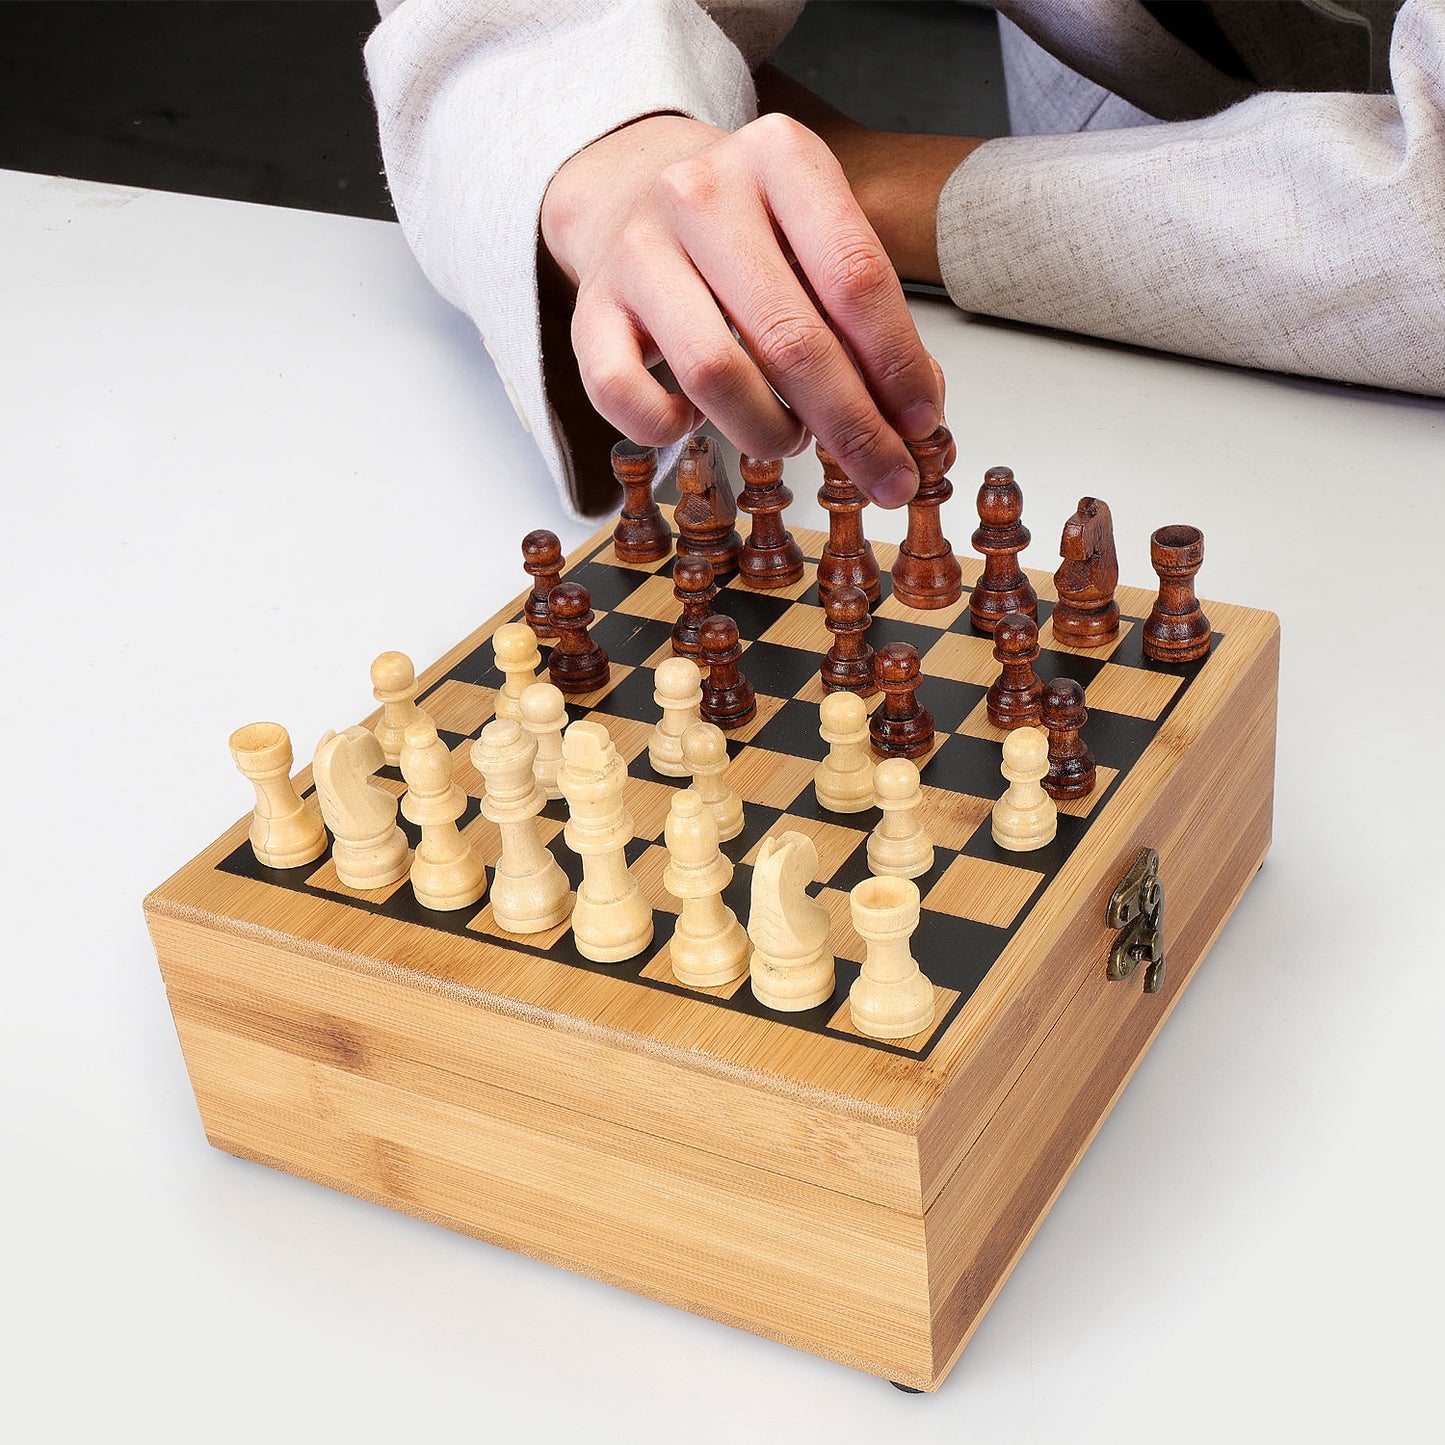  Wooden Box Wine Accessories and Chess Set